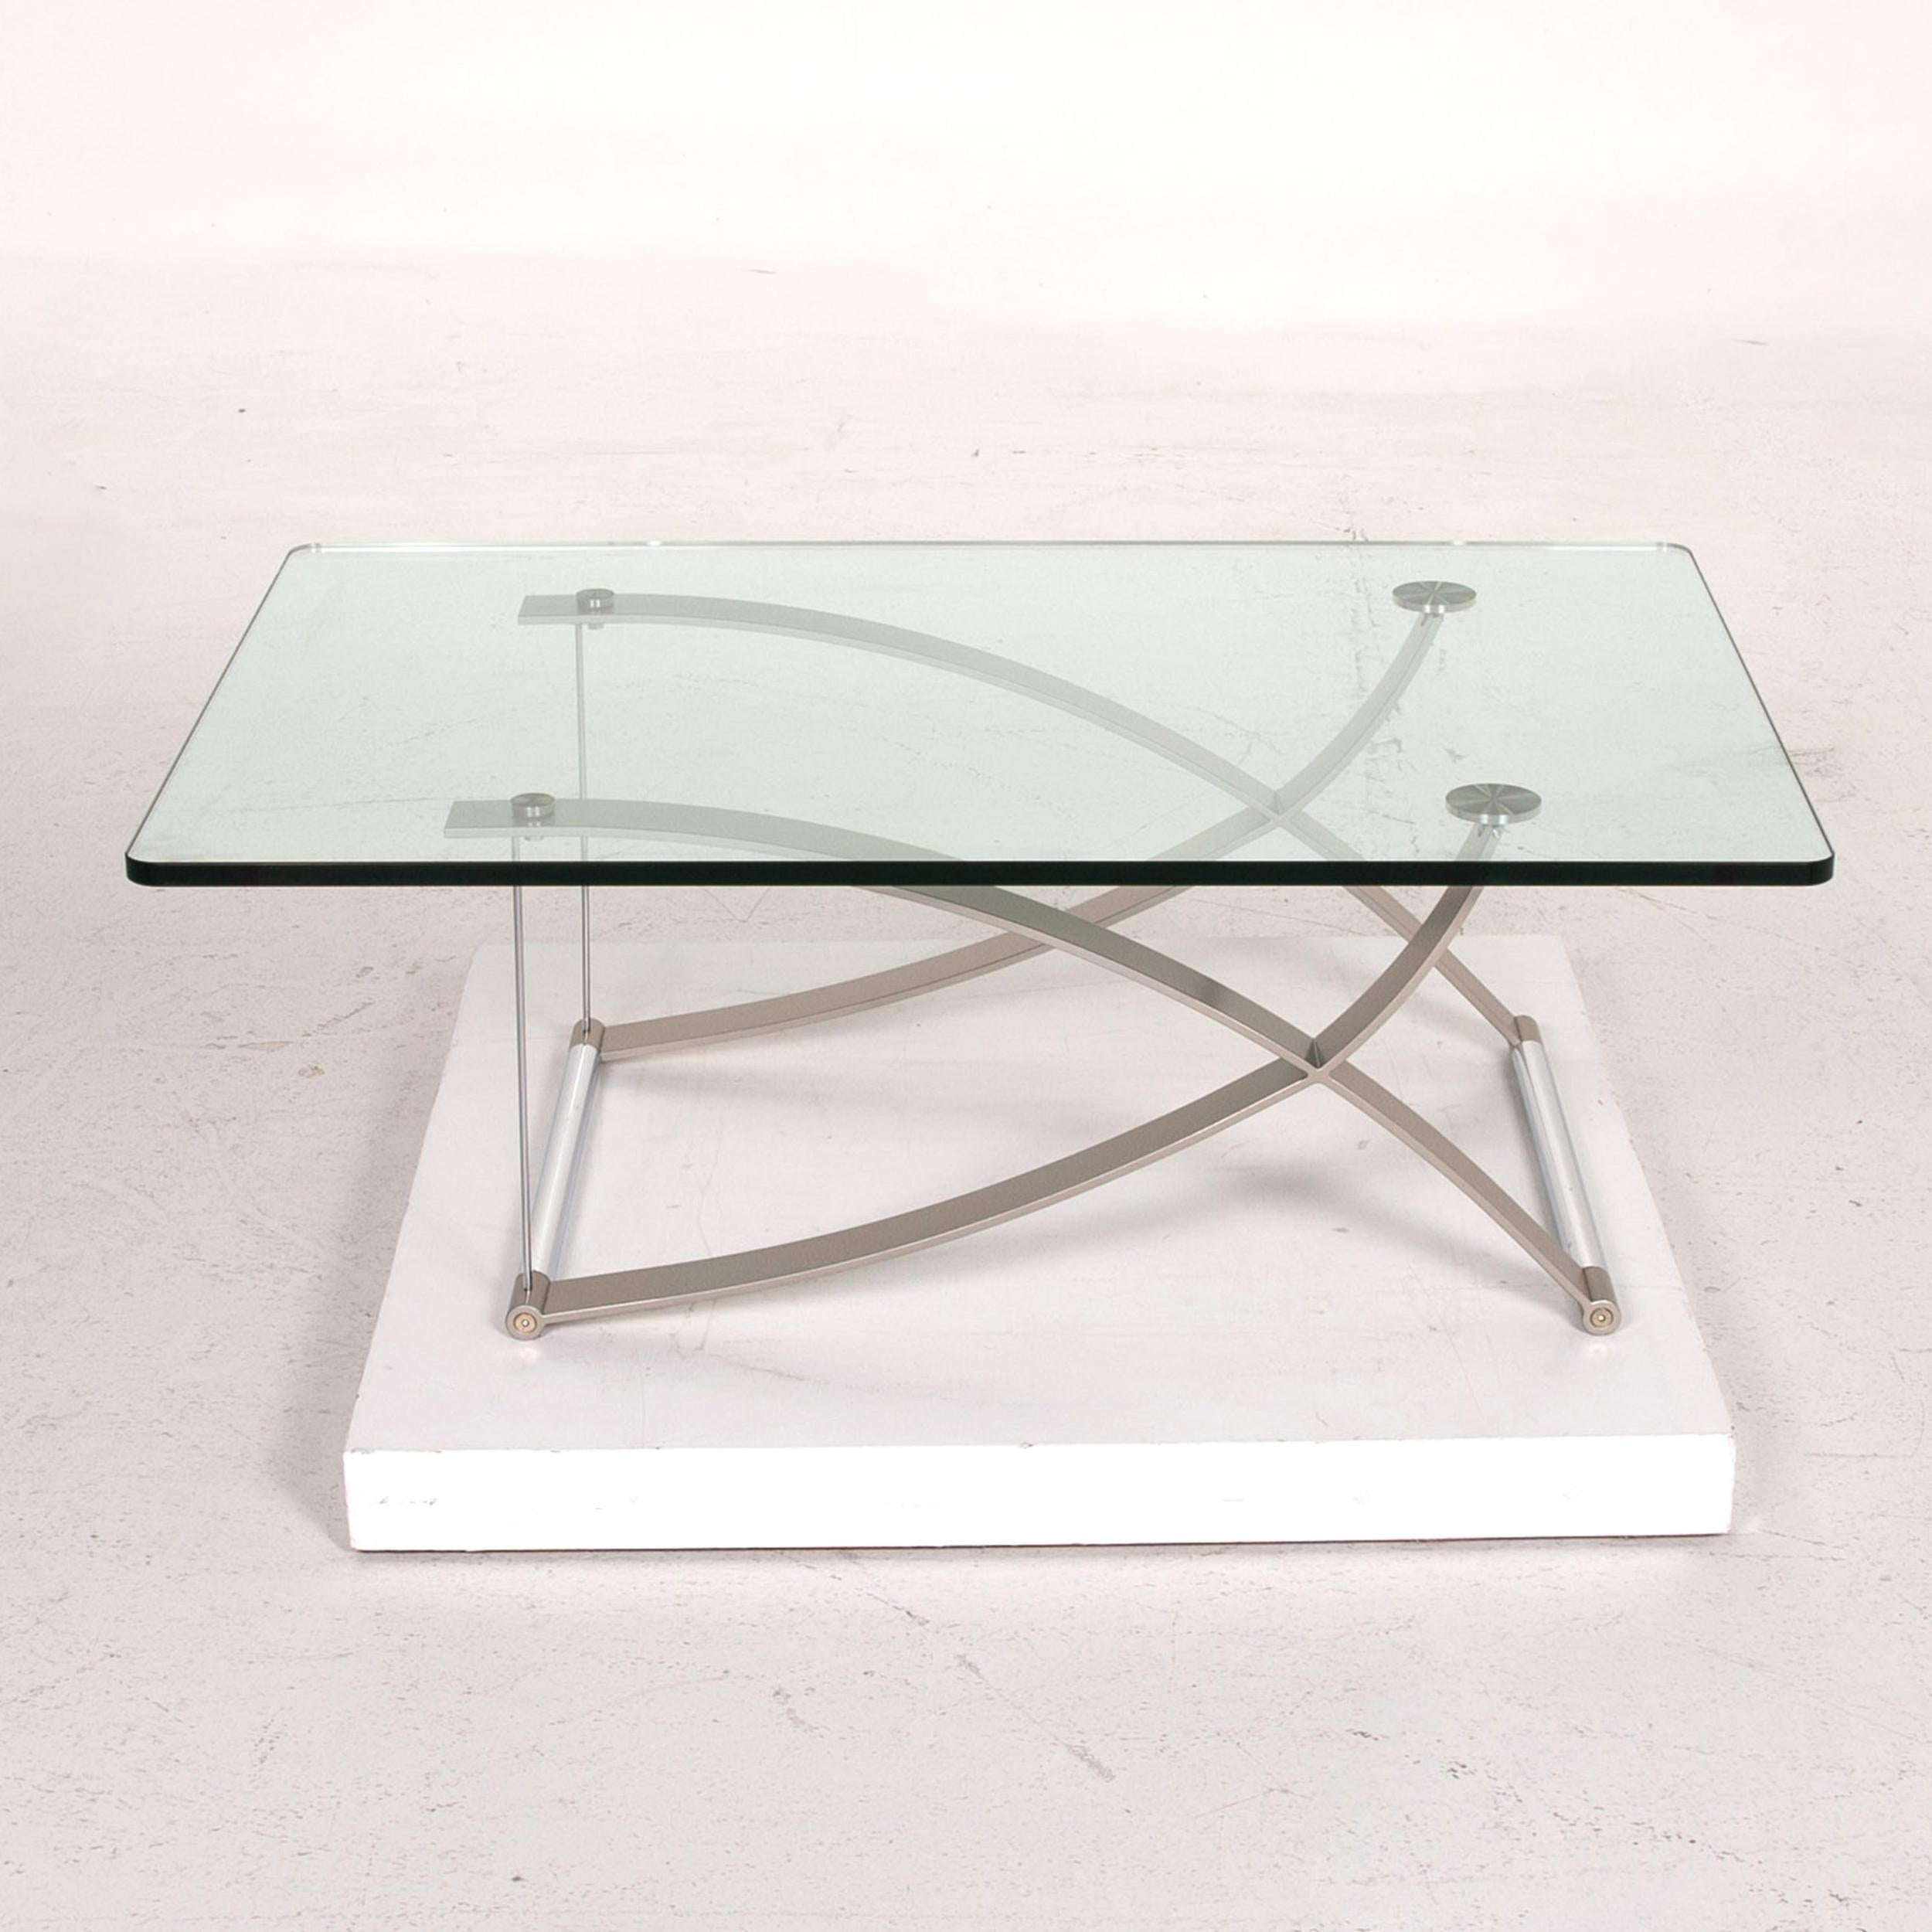 Contemporary Rolf Benz RB 1150 Glass Coffee Table Metal Table